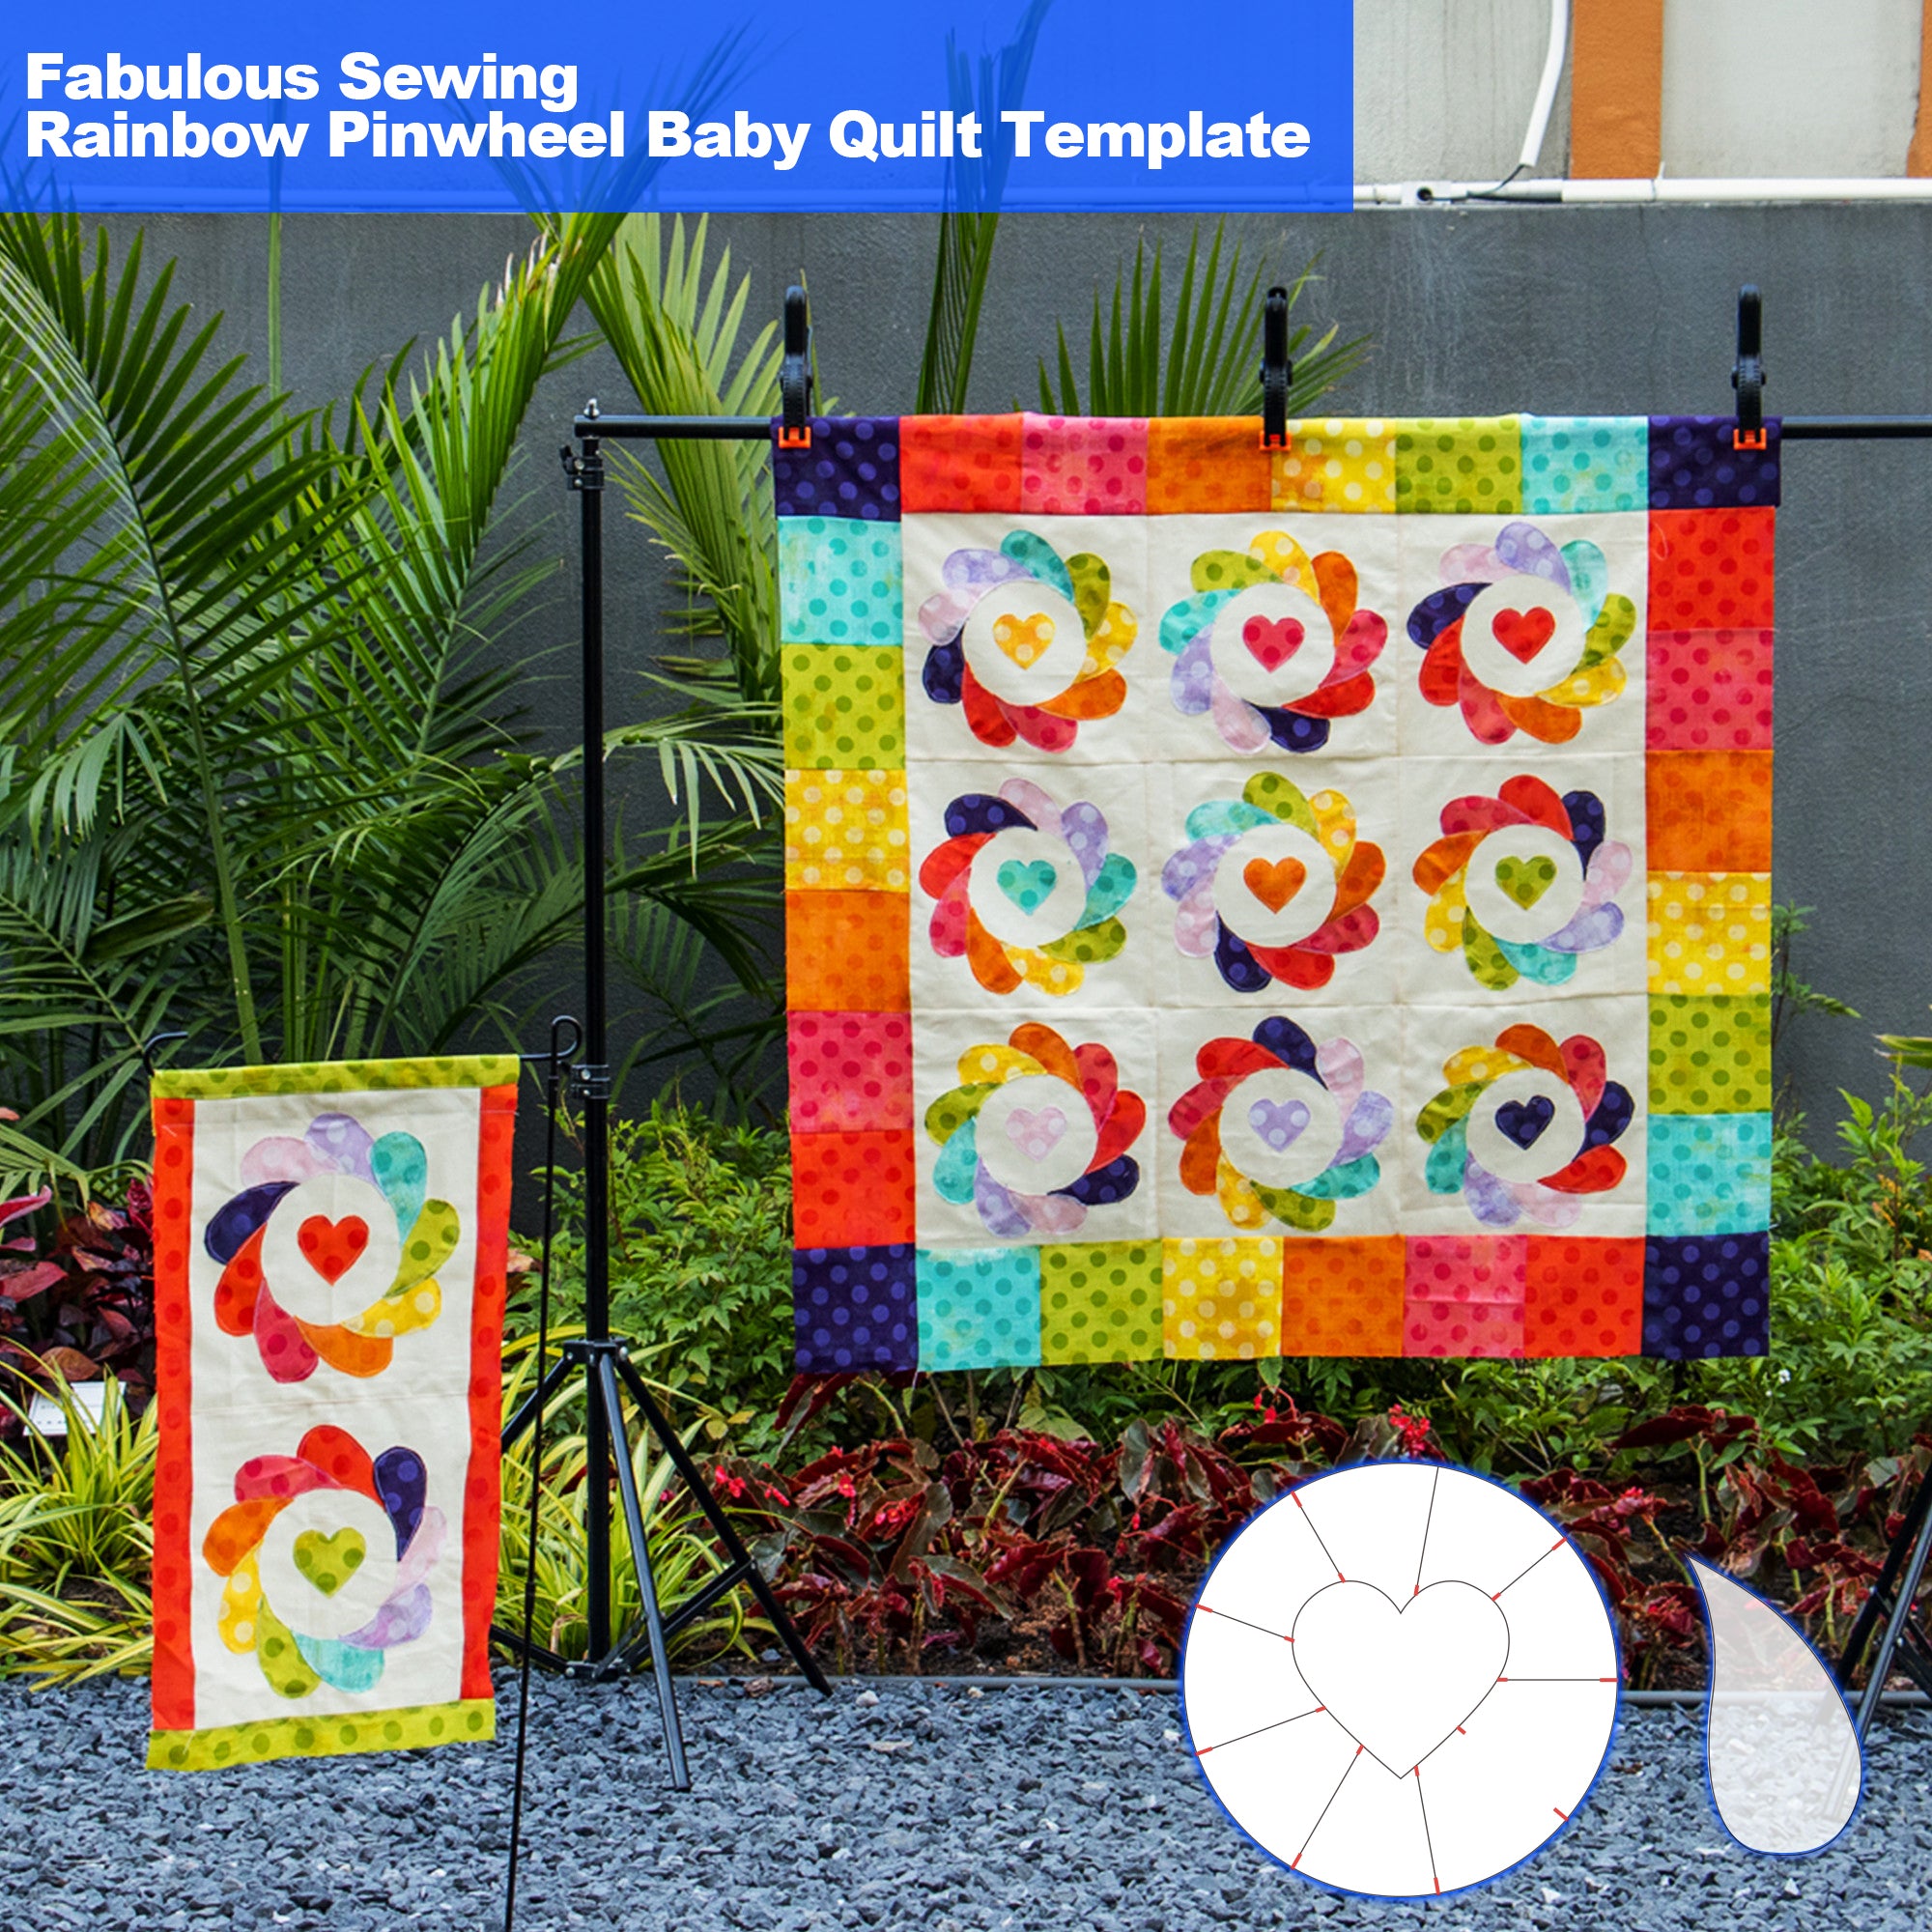 Fabulous Sewing Rainbow Pinwheel Baby Quilt Template